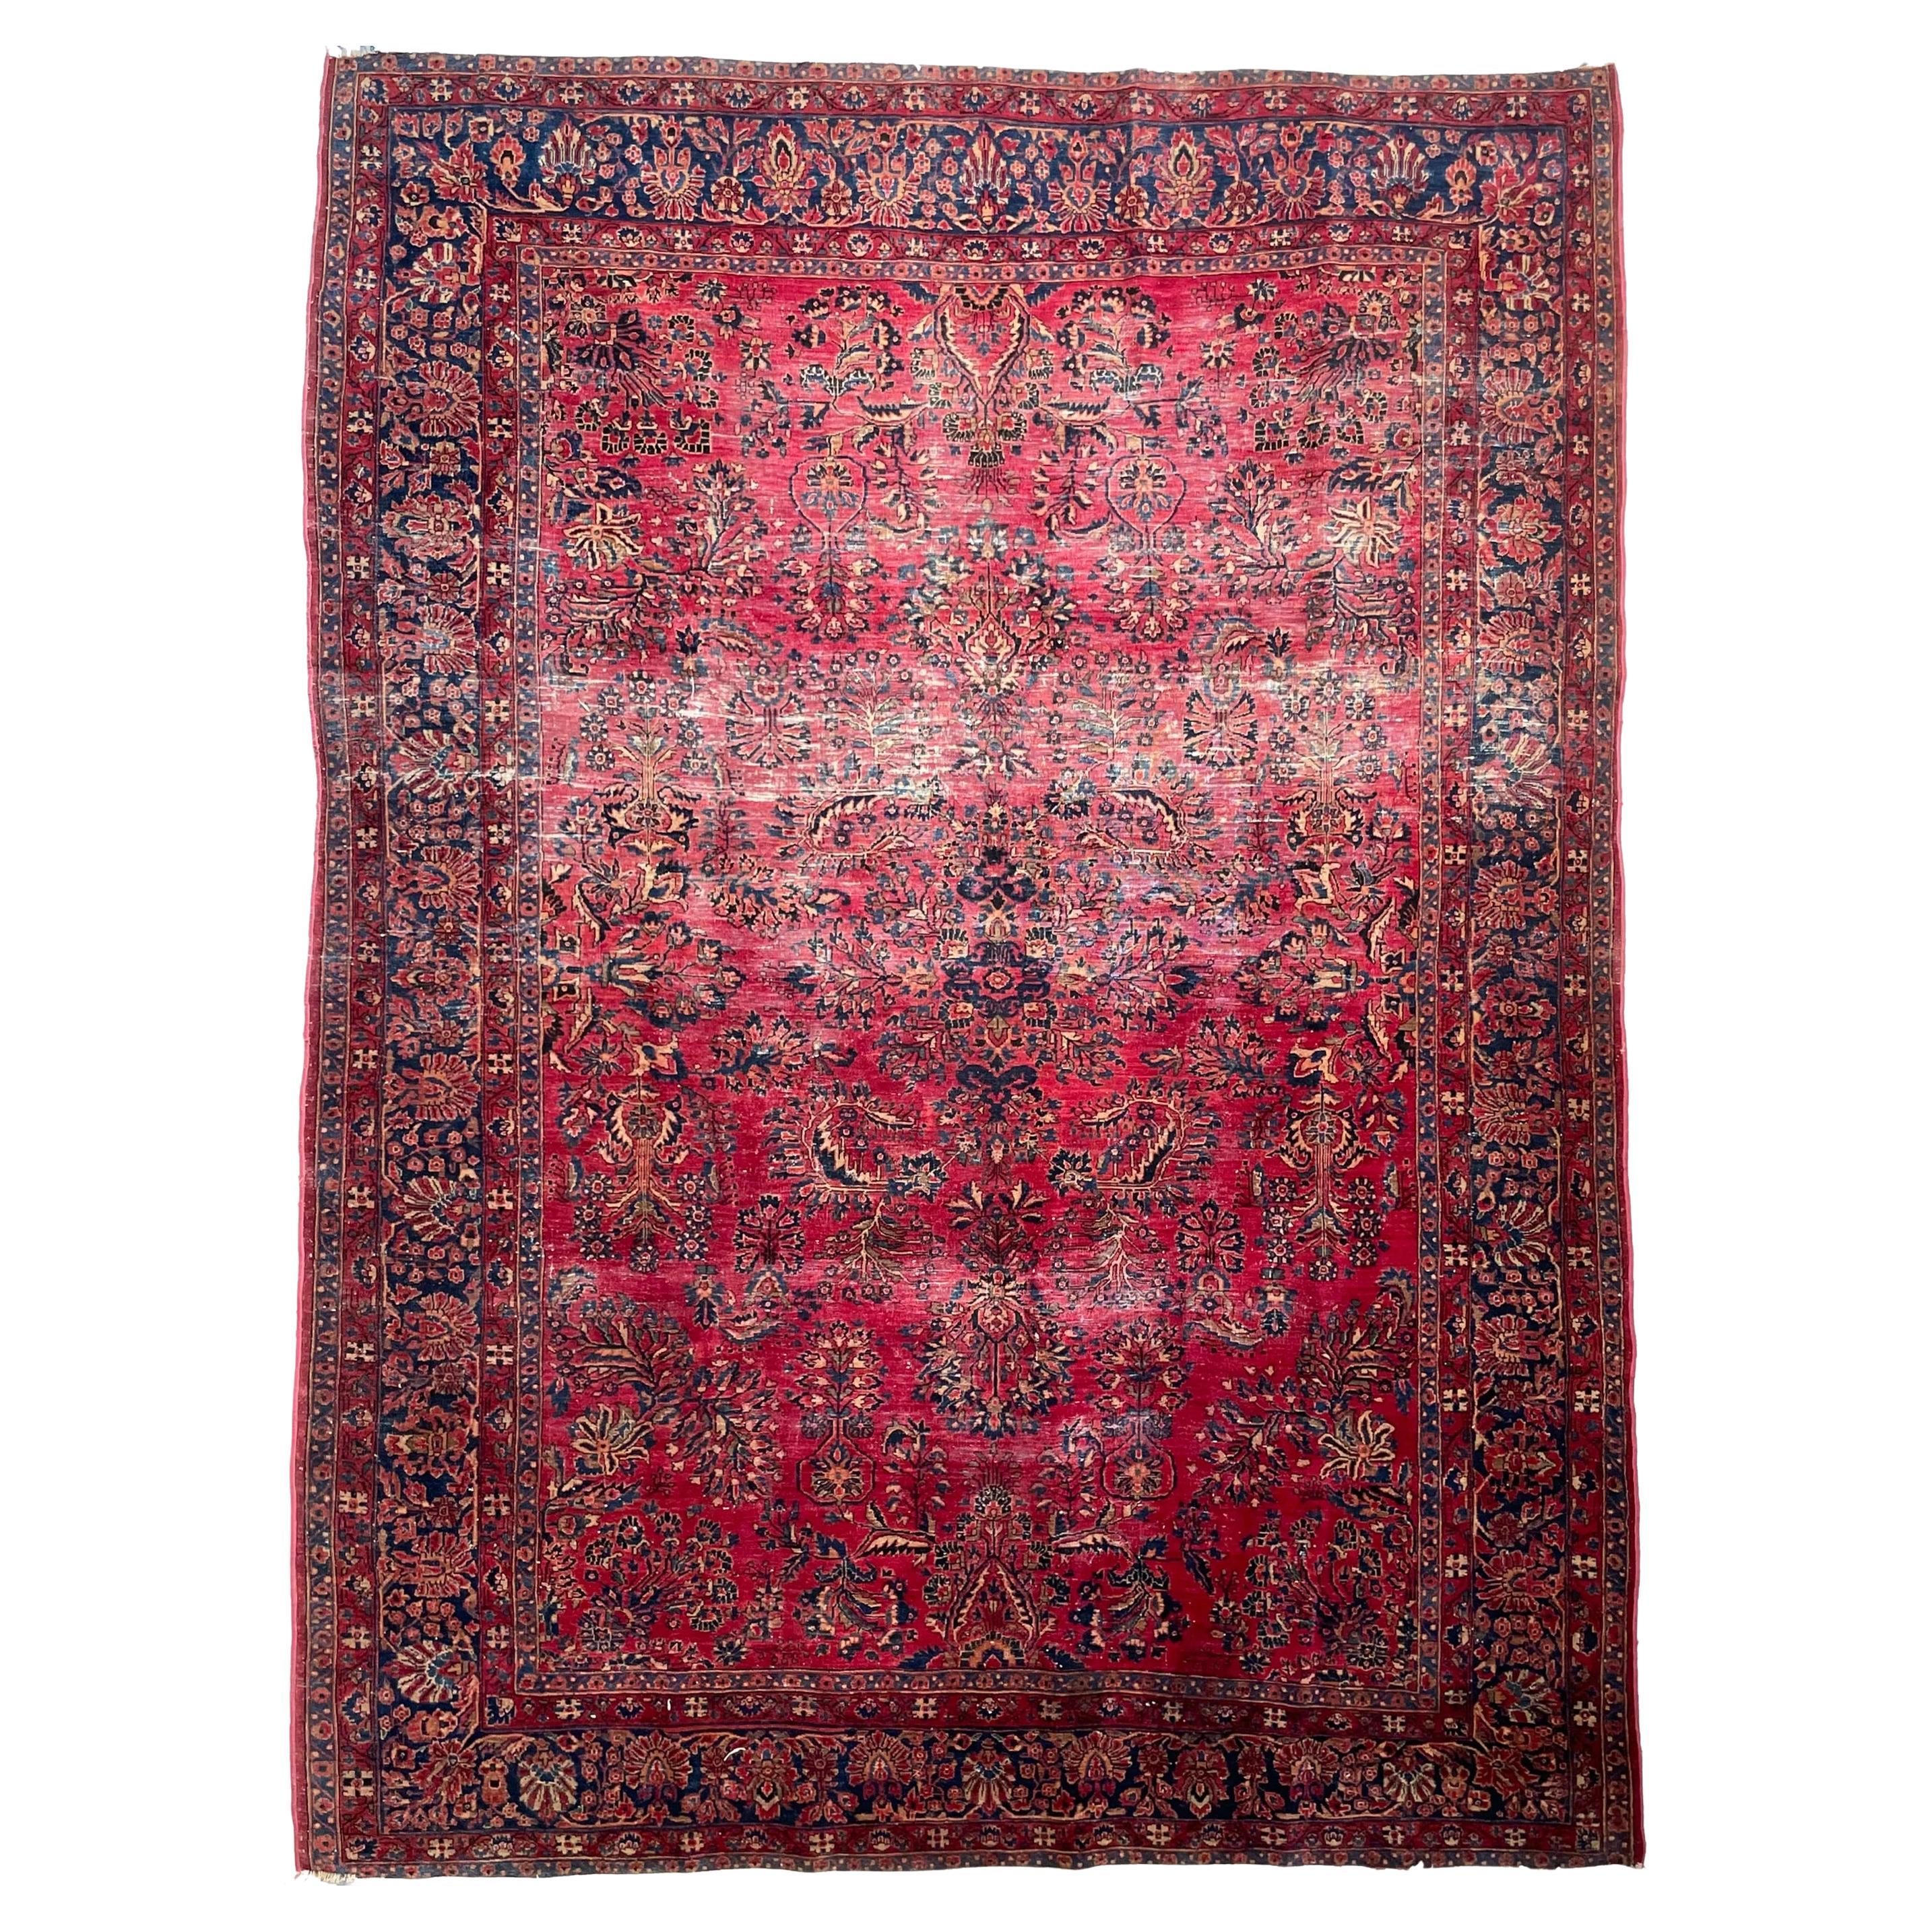 Antique Lovely Botanical Distressed Persian Sarouk Rug, circa 1920-30's For Sale